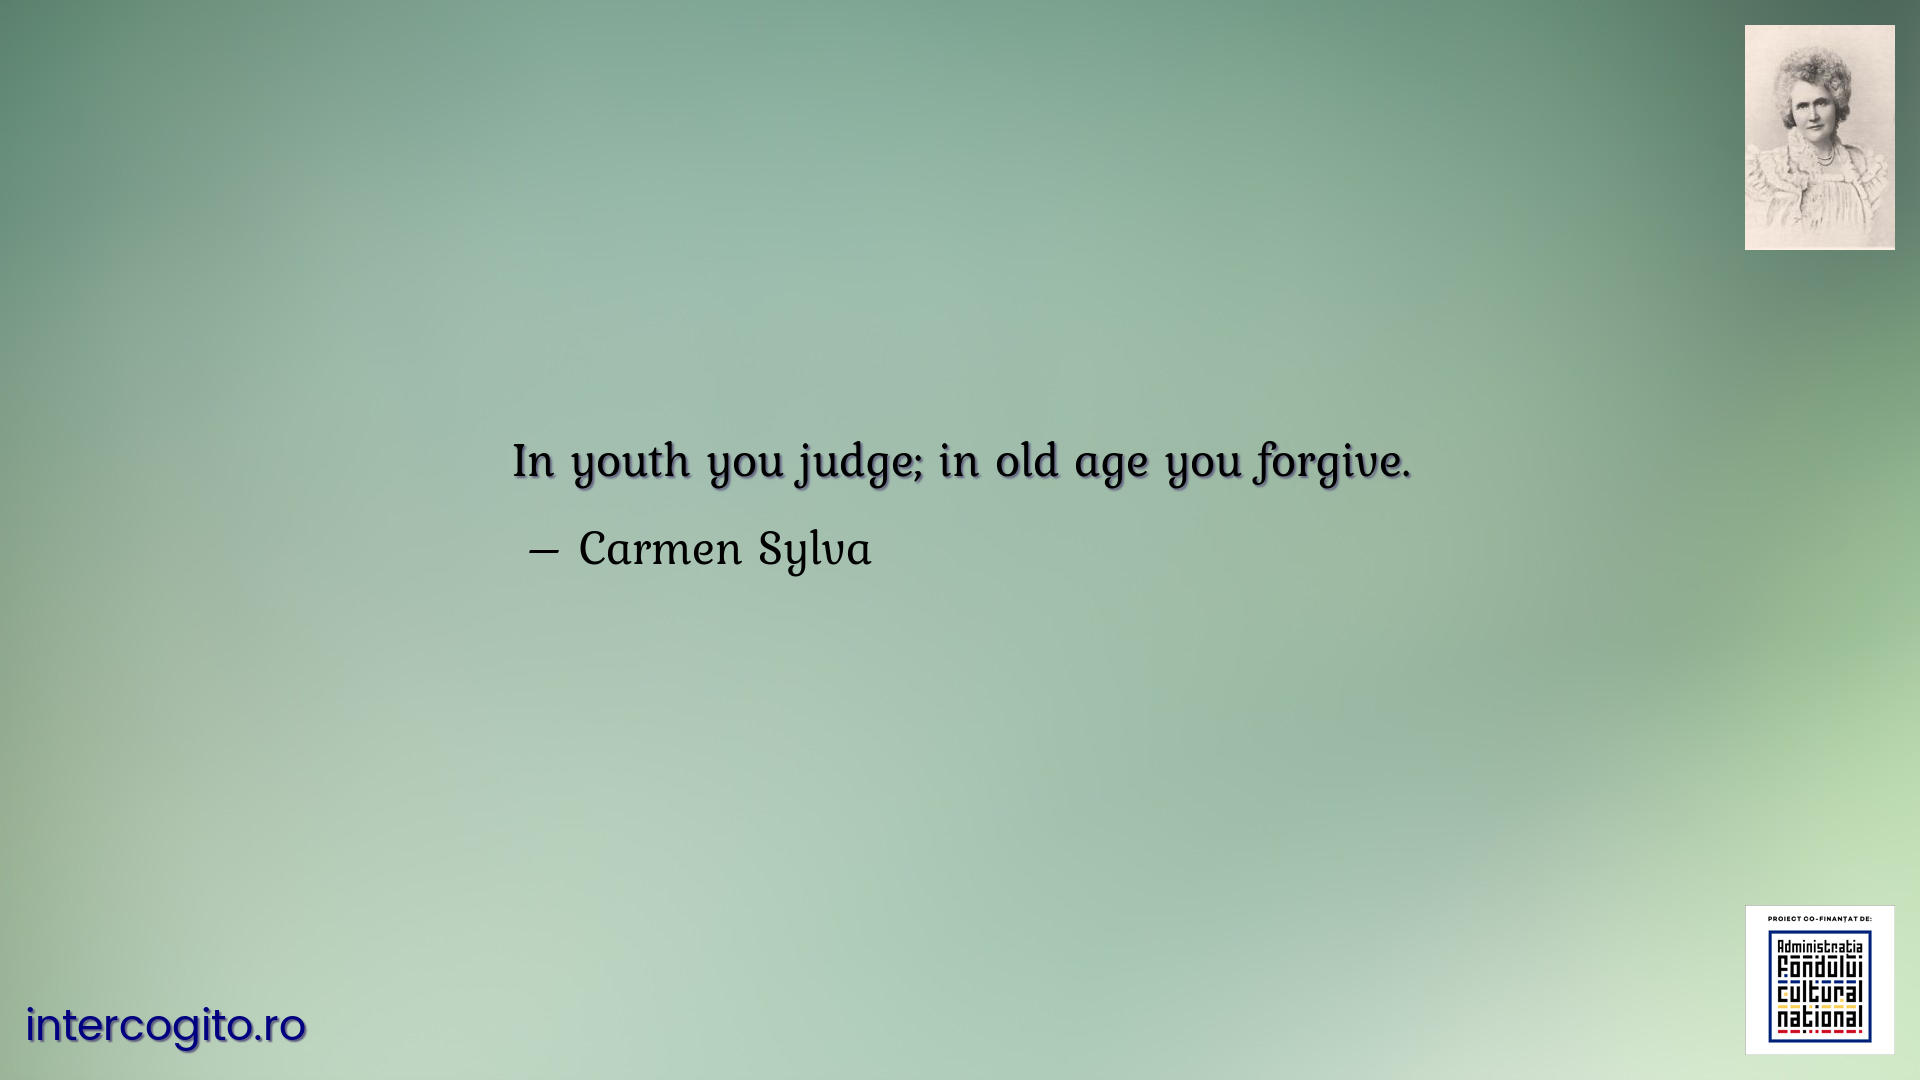 In youth you judge; in old age you forgive.